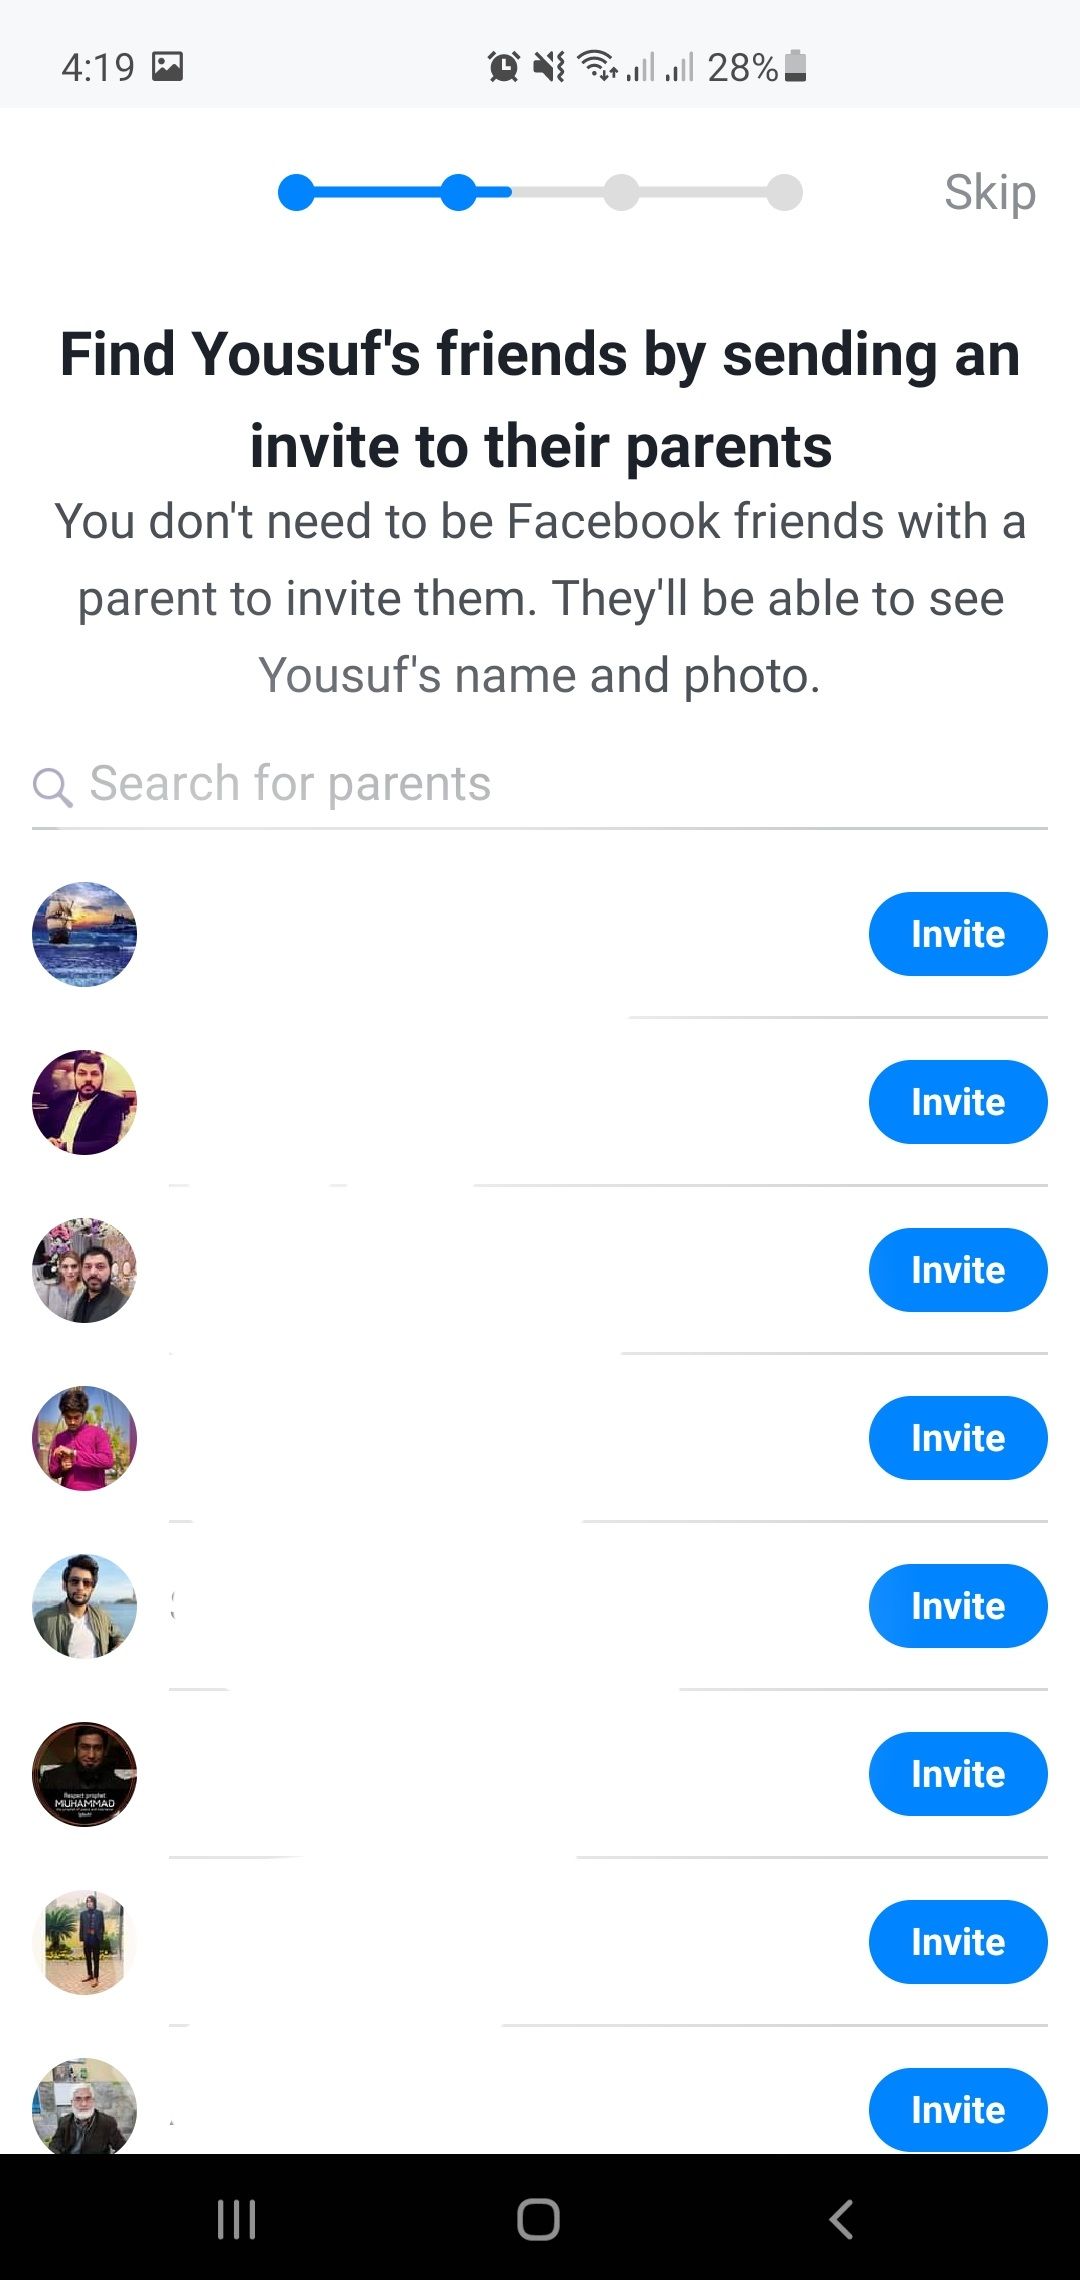 Find friends by sending invites to parents